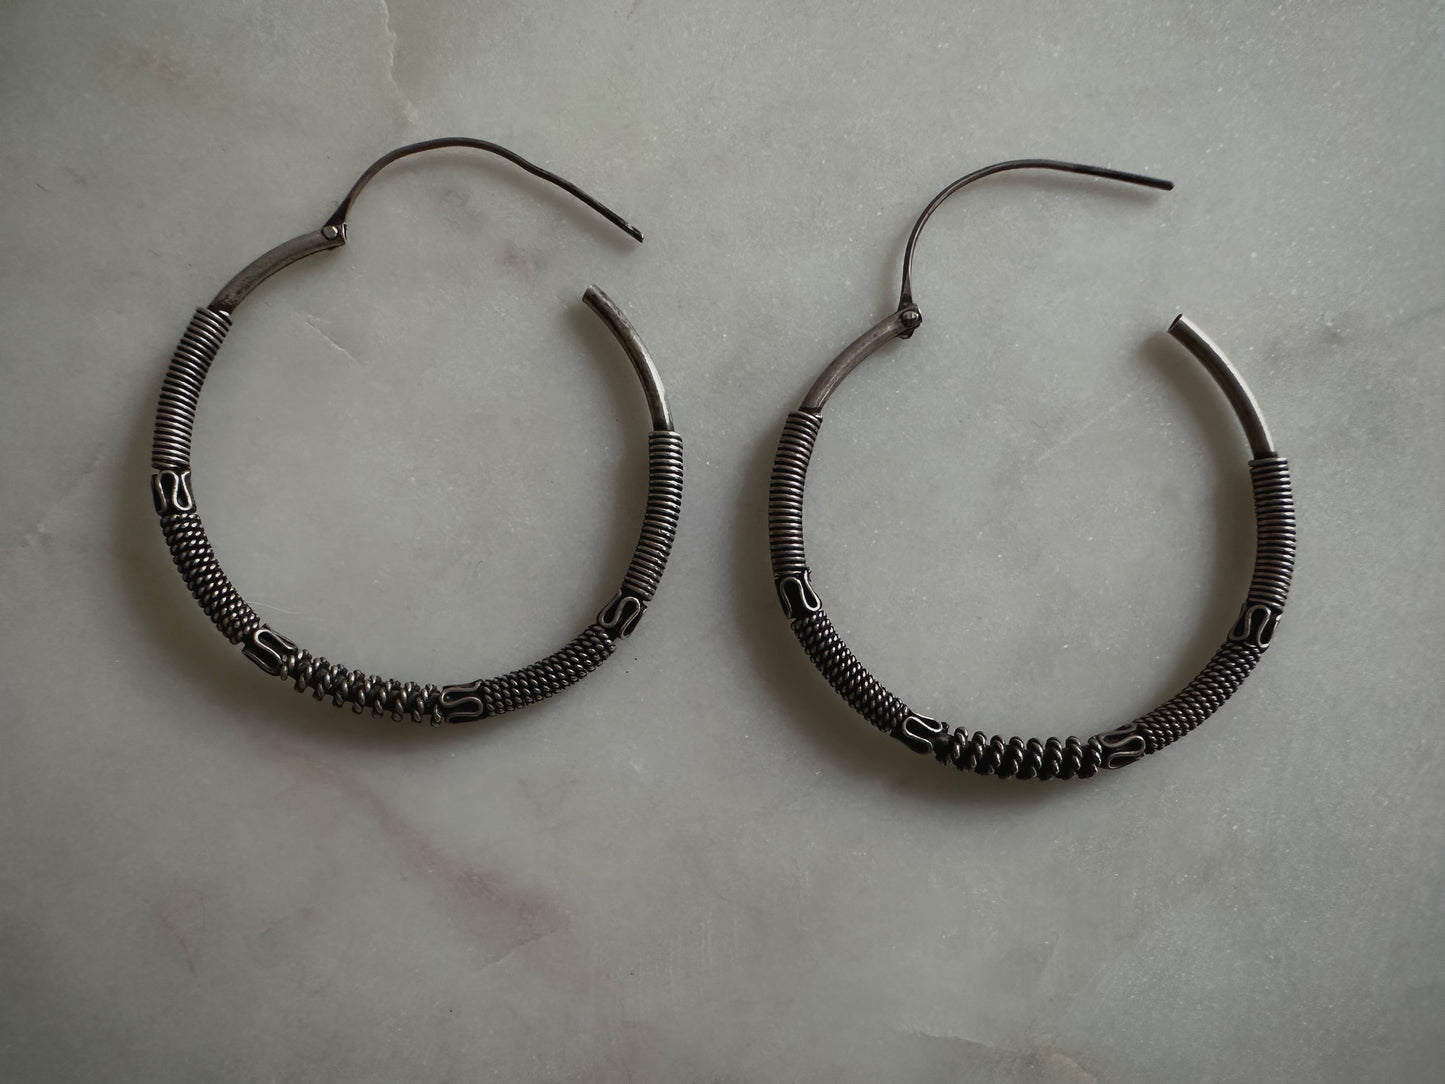 Vintage silver earrings from Rajasthan, India